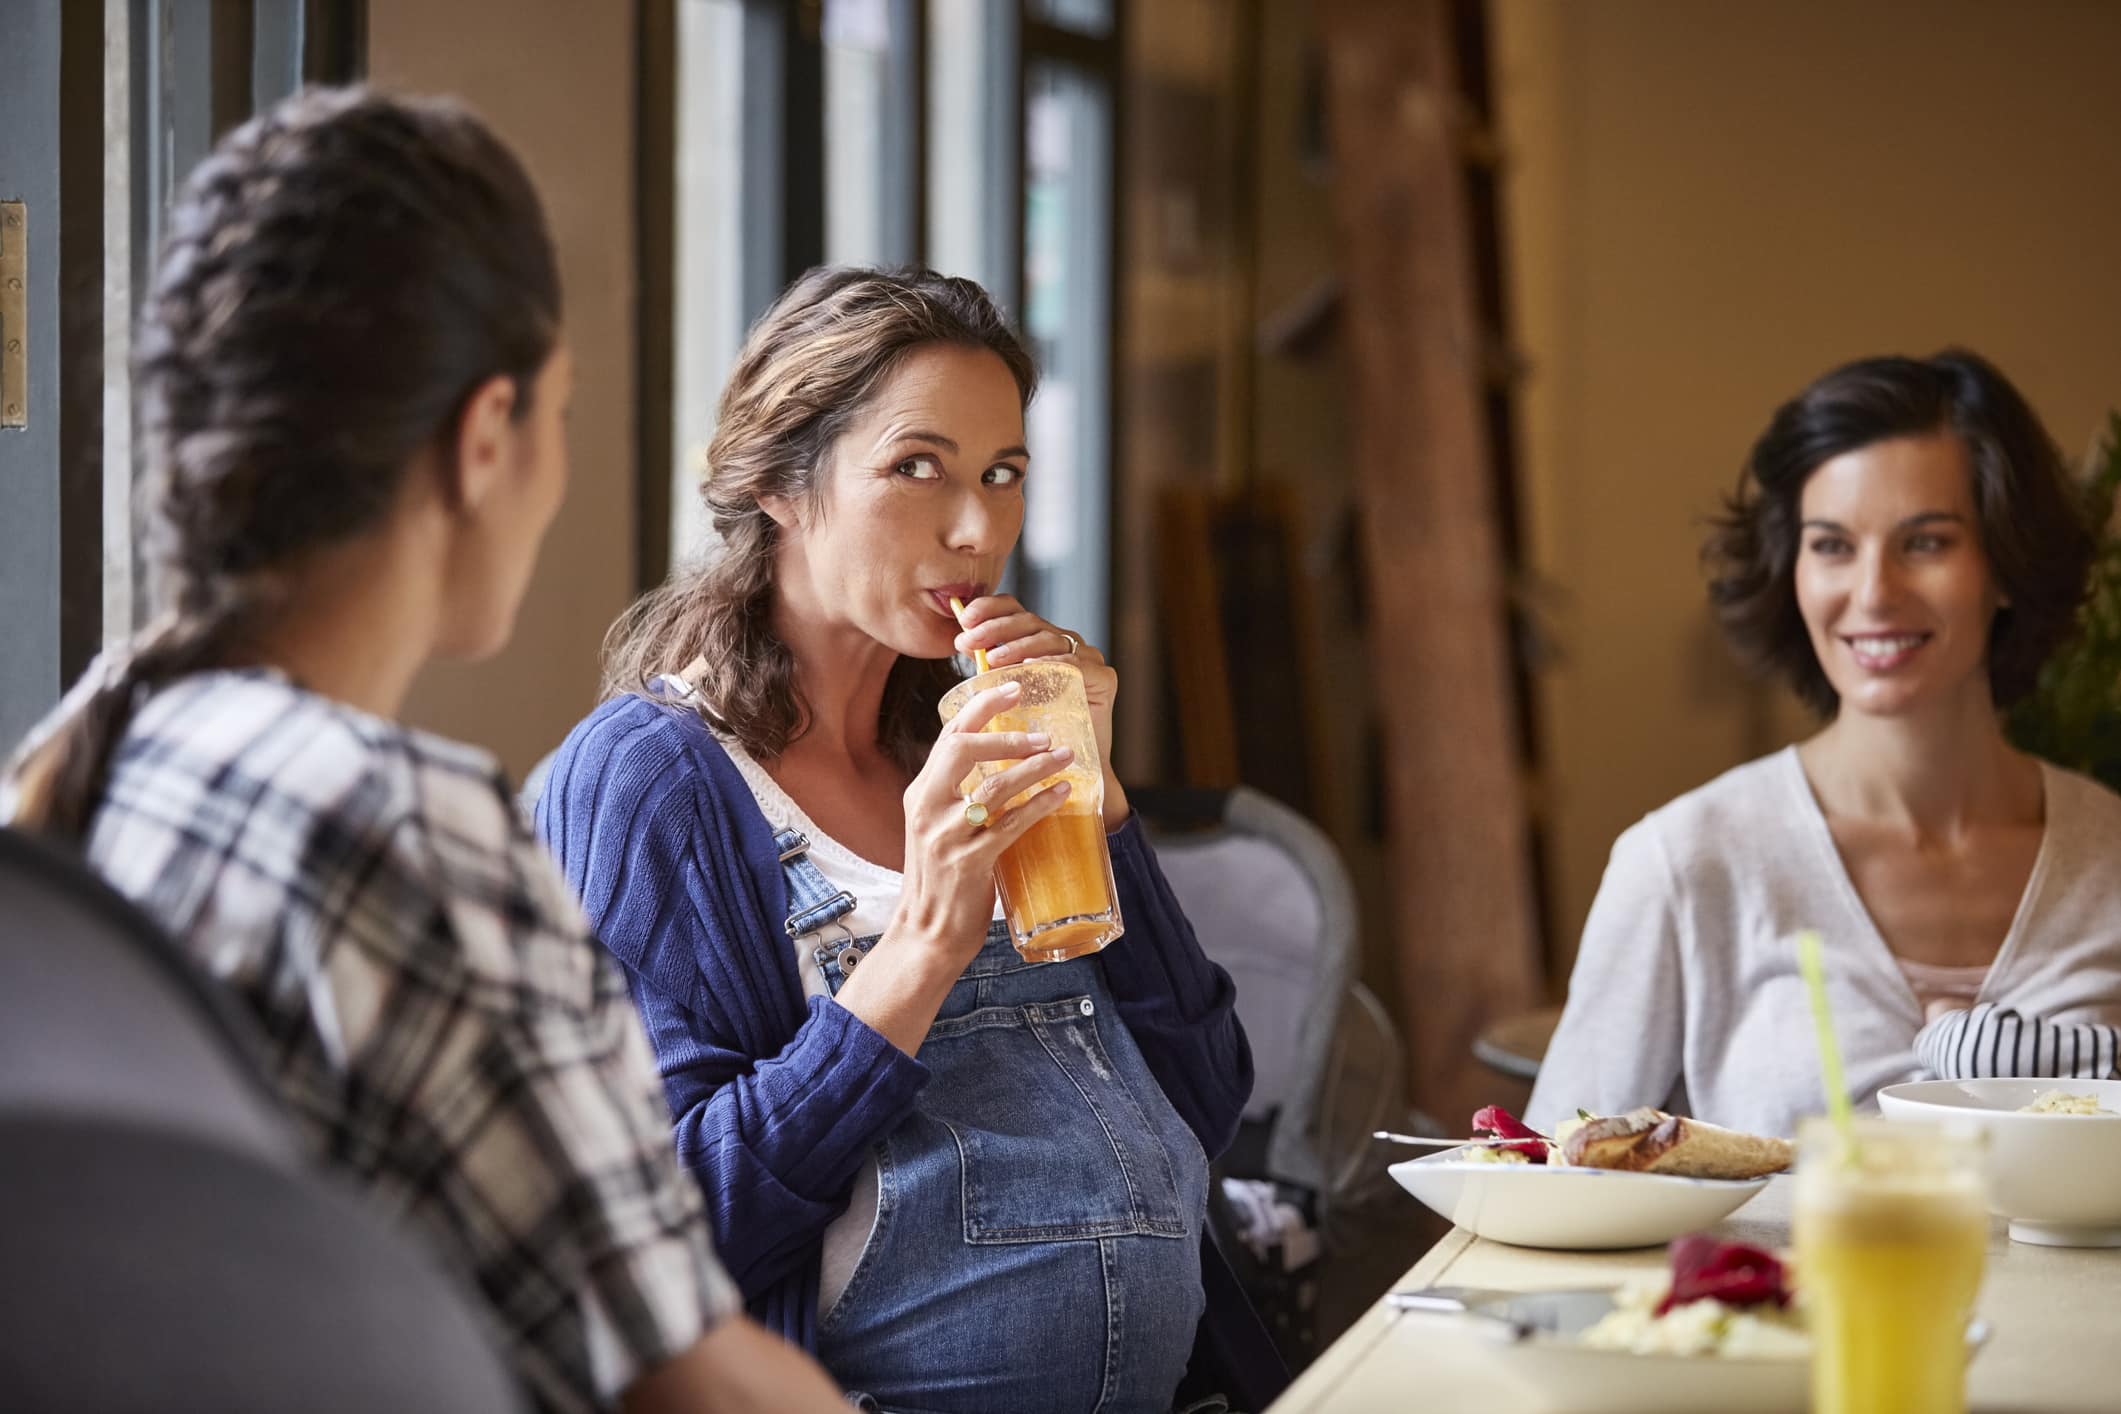 Pregnant woman drinking juice while sitting with friends at restaurant